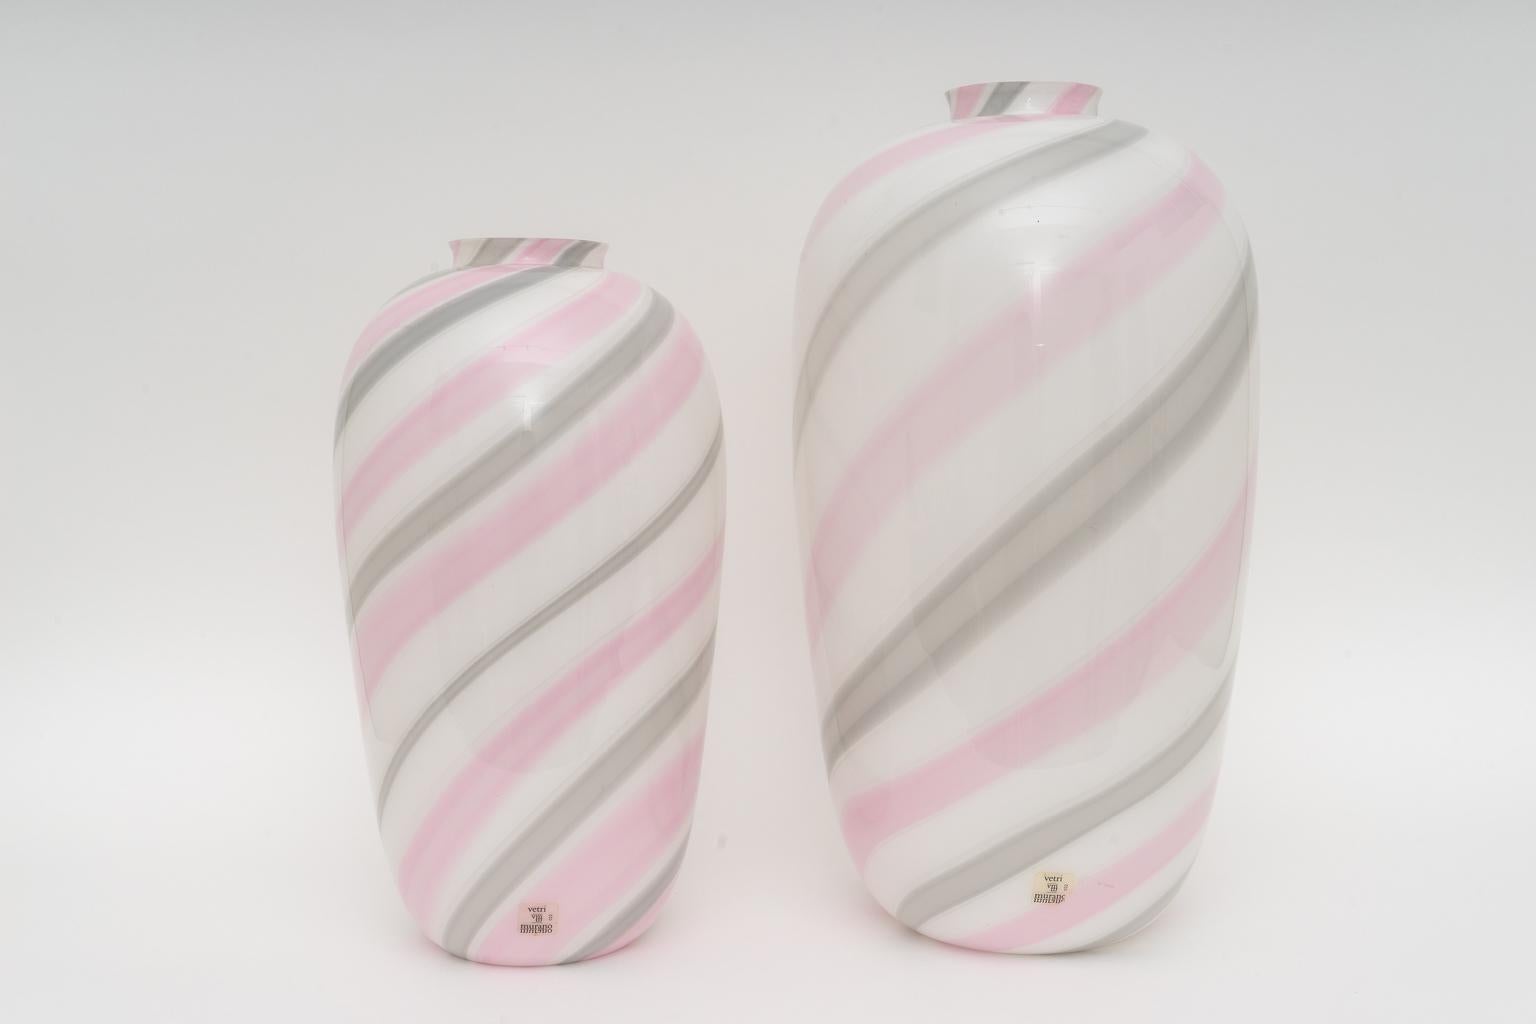 This stylish and chic set of two Murano glass vases were created in the 1980s by Vetri and were acquired from a Palm Beach estate. The can be used to hold your floral arrangements and simply as objects of beauty.